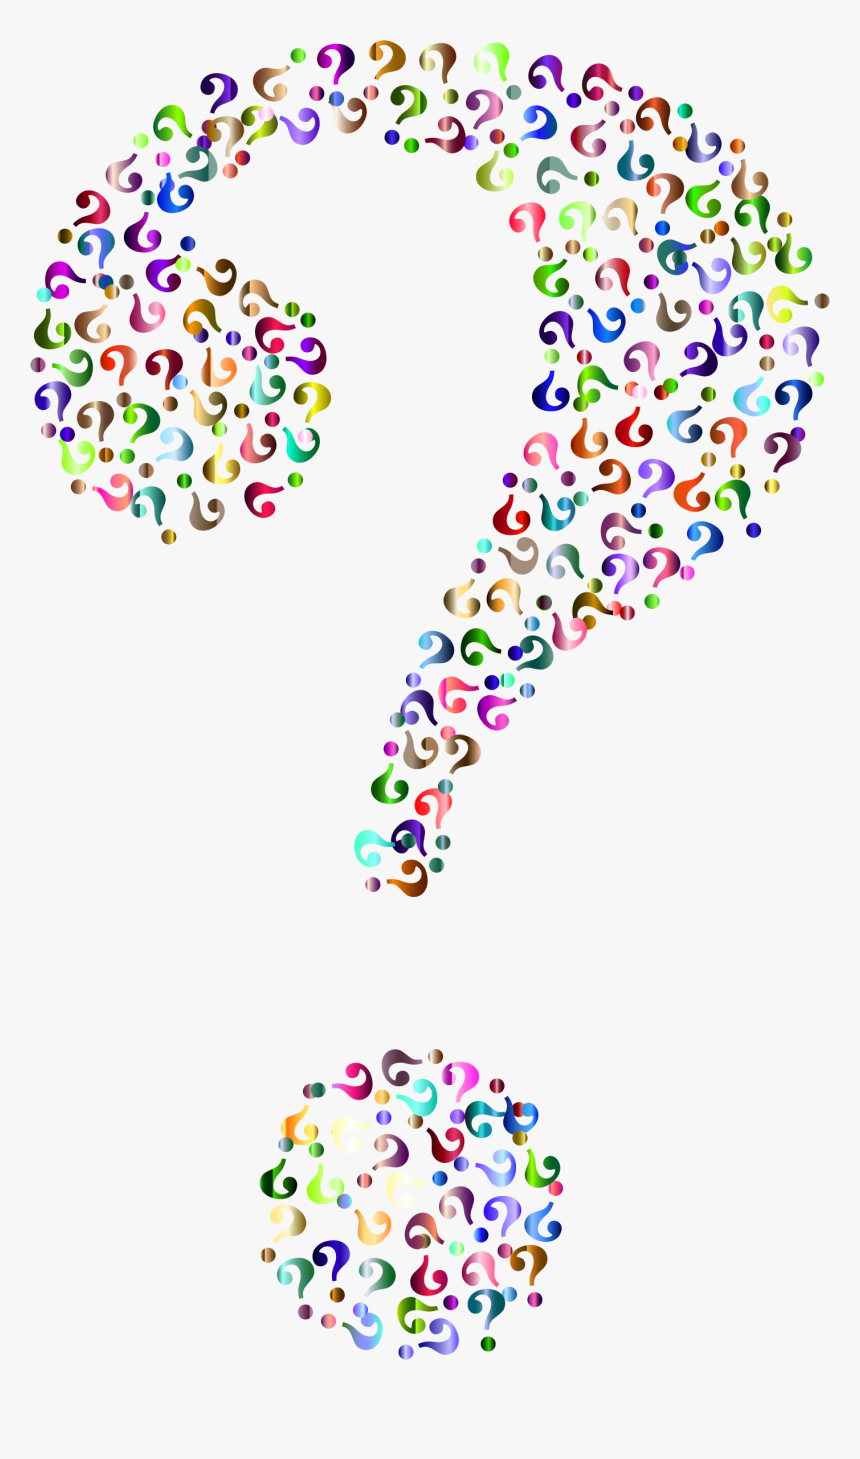 Transparent Question Icon Png - Question Marks With No Background, Png Download, Free Download